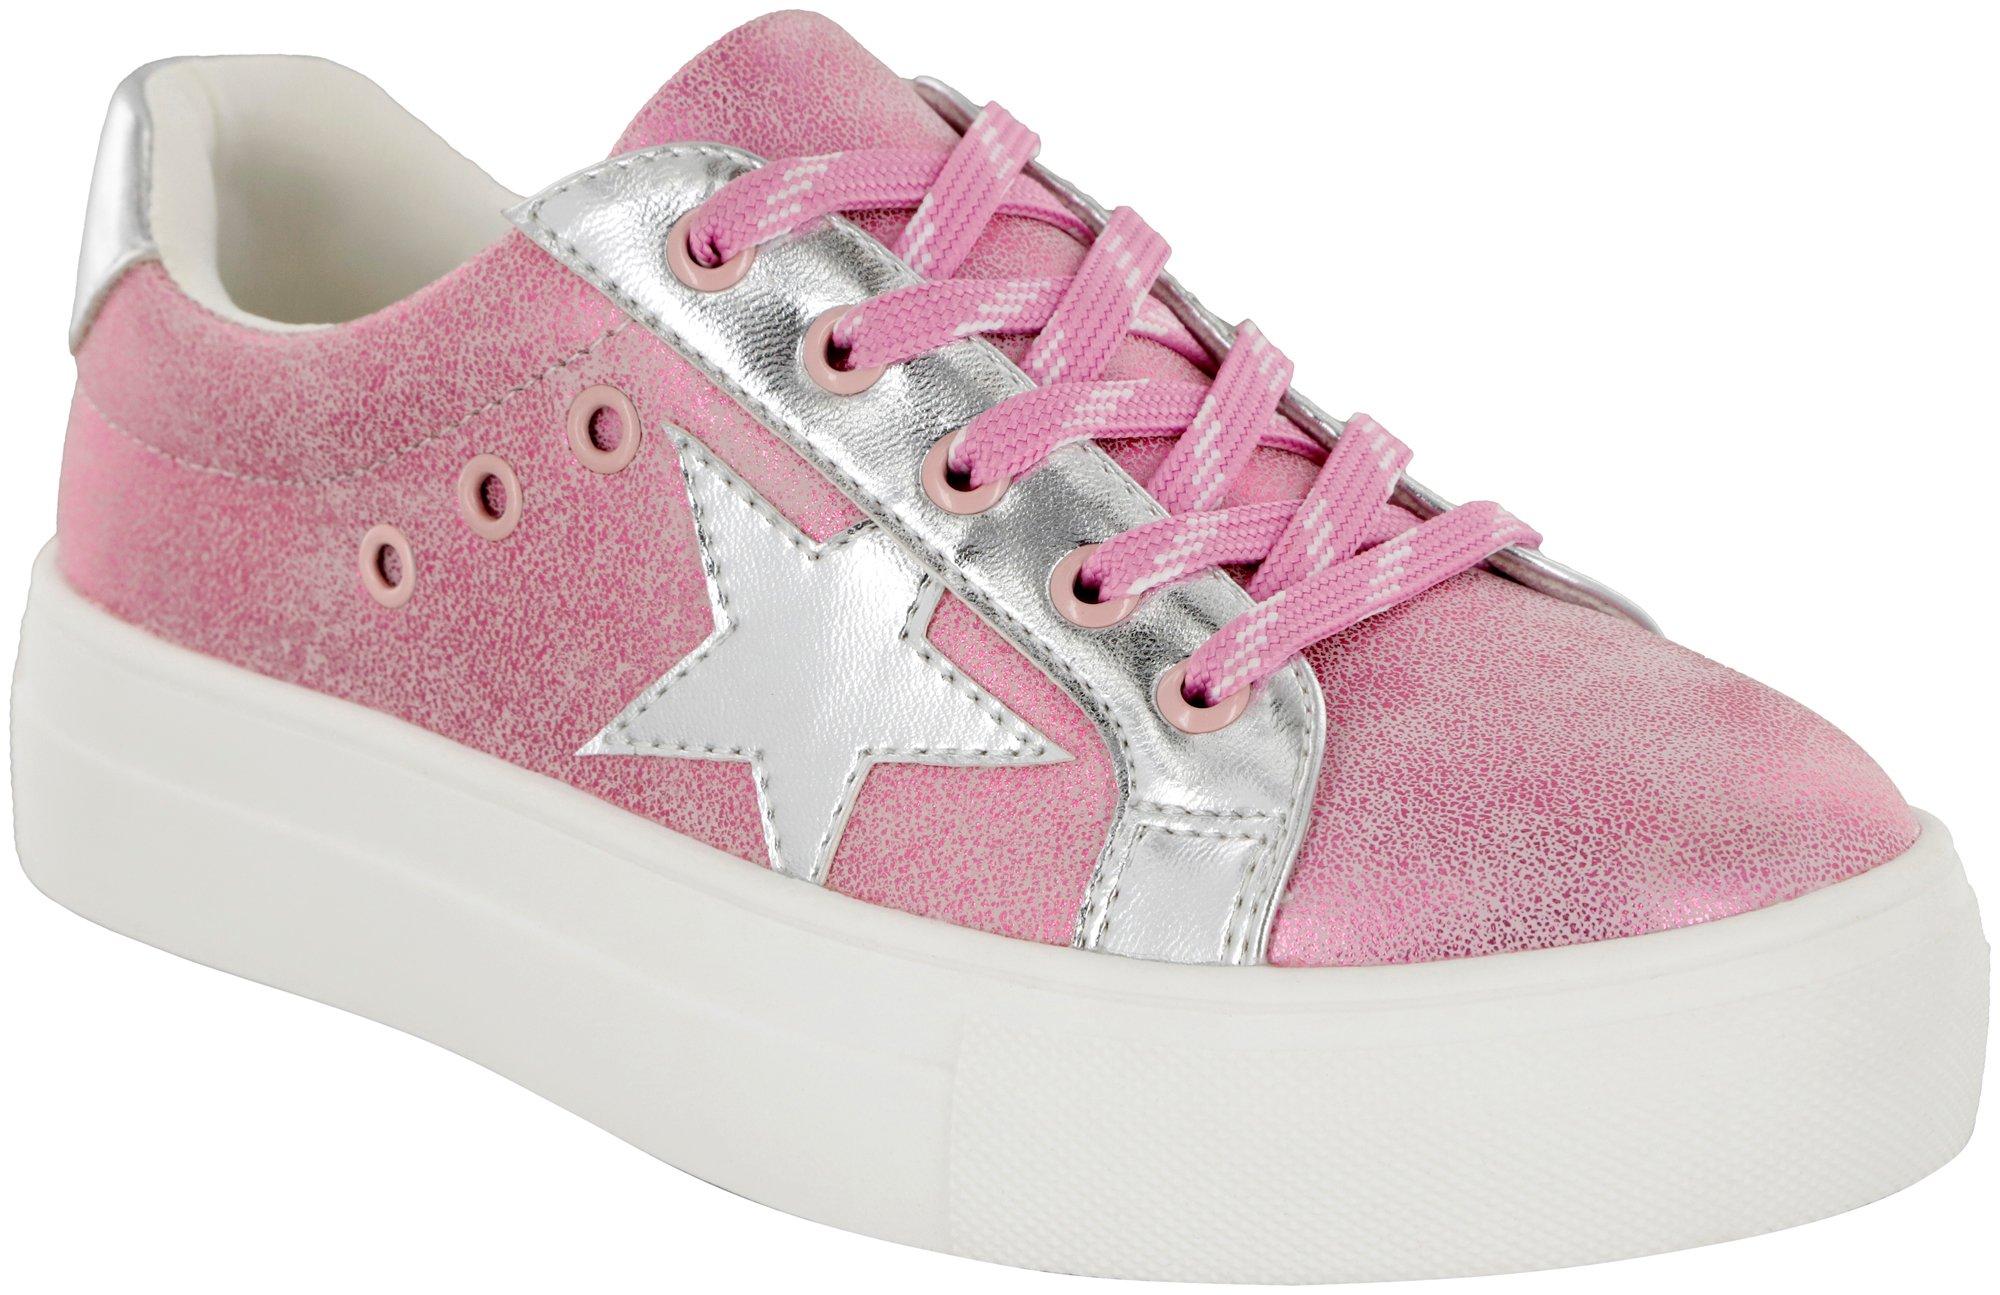 Mia Girls Sparklee Athletic Shoes